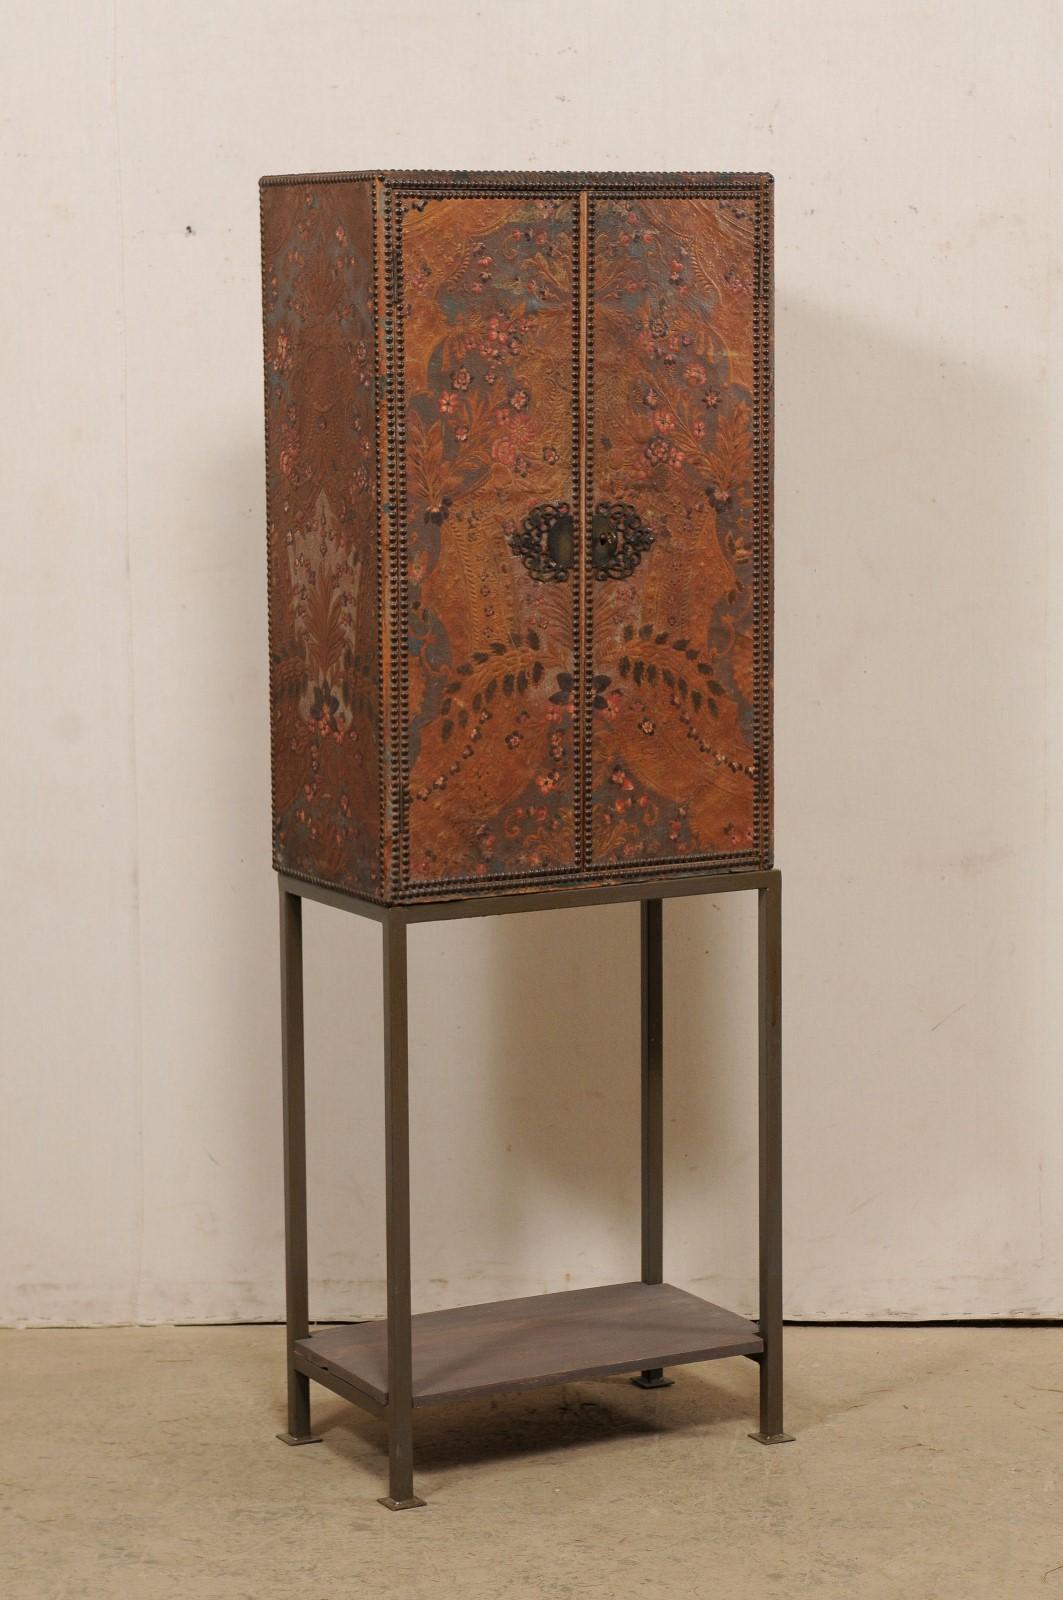 A Spanish embossed leather cabinet from the early 20th century, on newer custom iron base. This antique cabinet from Spain is beautifully wrapped in embossed leather with a floral motif, with nail head trim accents, and ornate hardware. The cabinet